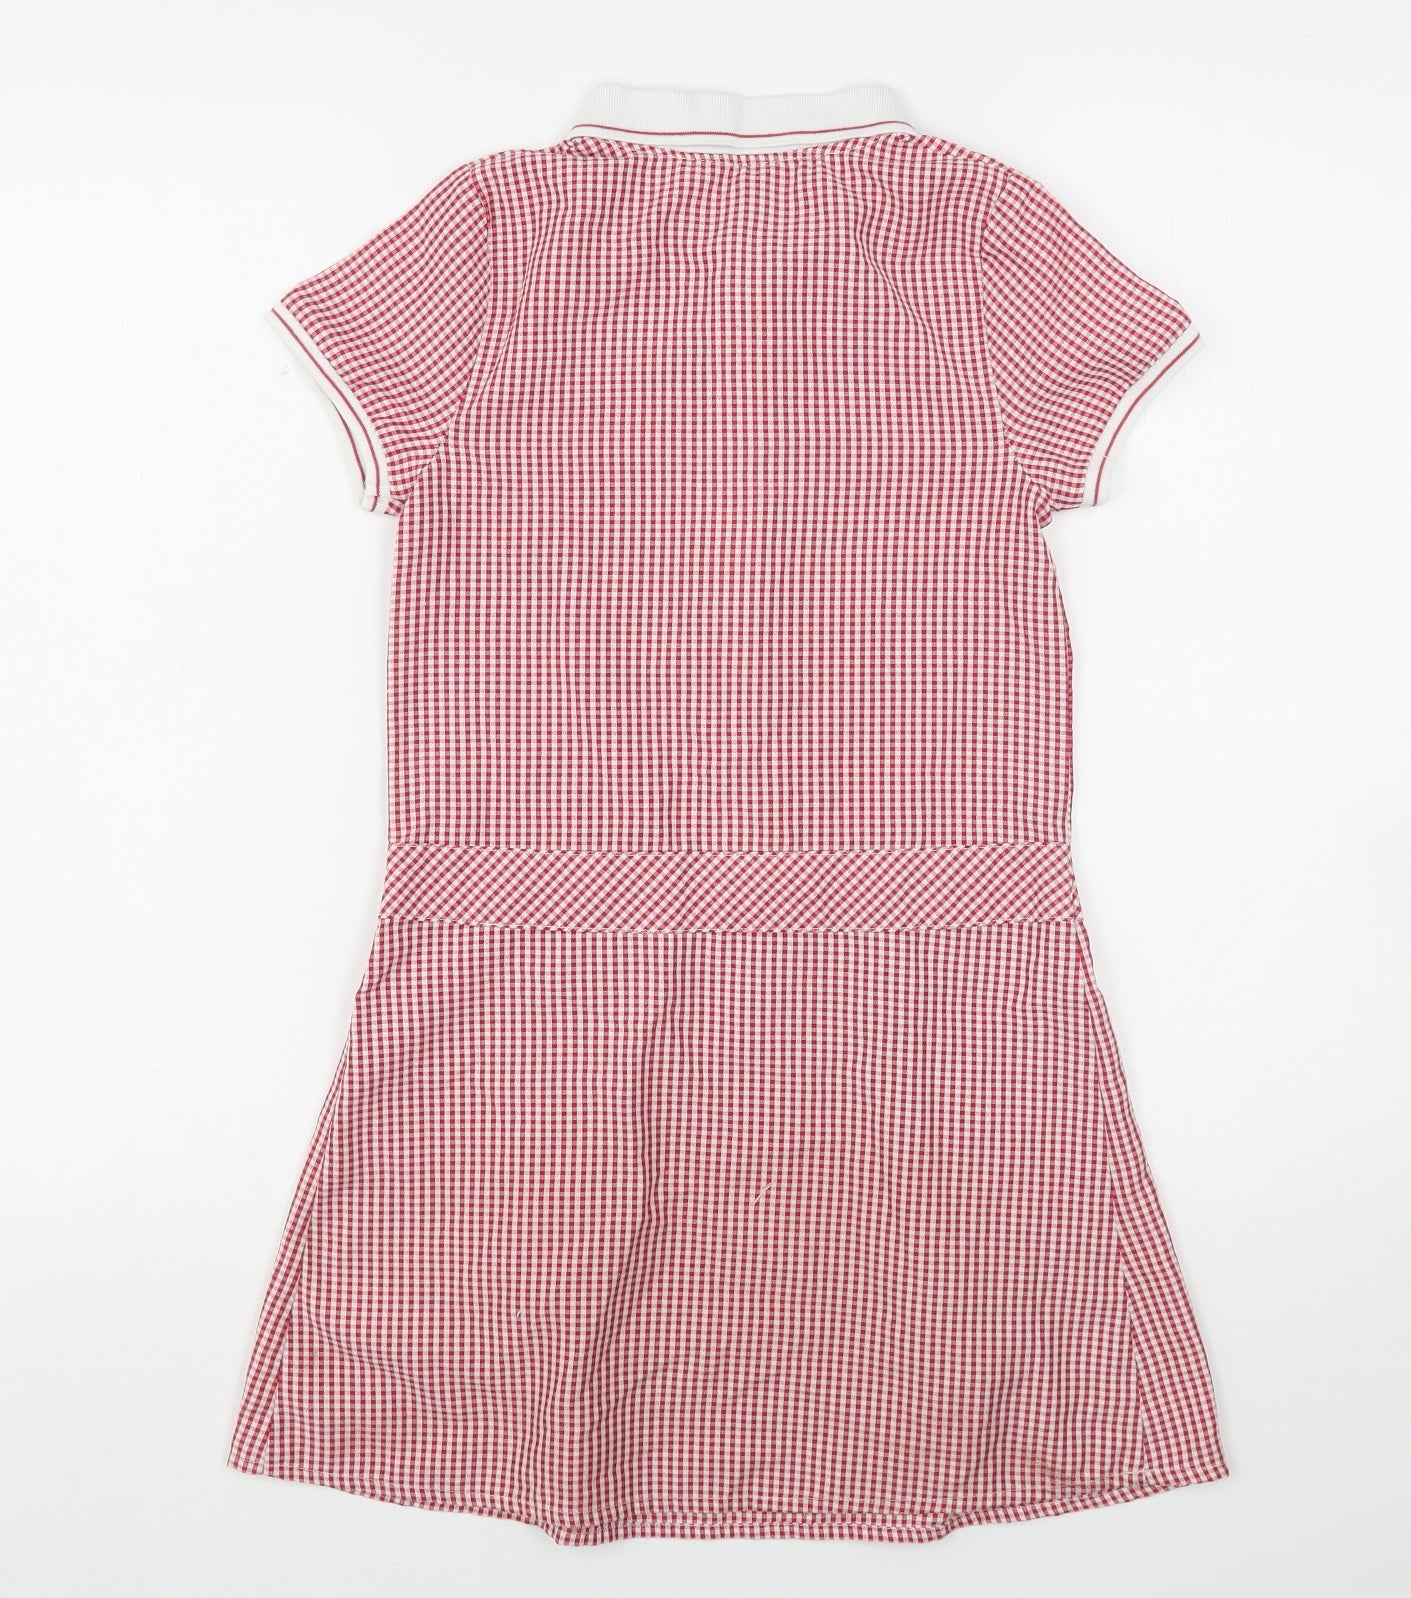 Pep&Co Girls Red Check Polyester Shirt Dress  Size 8-9 Years  Collared